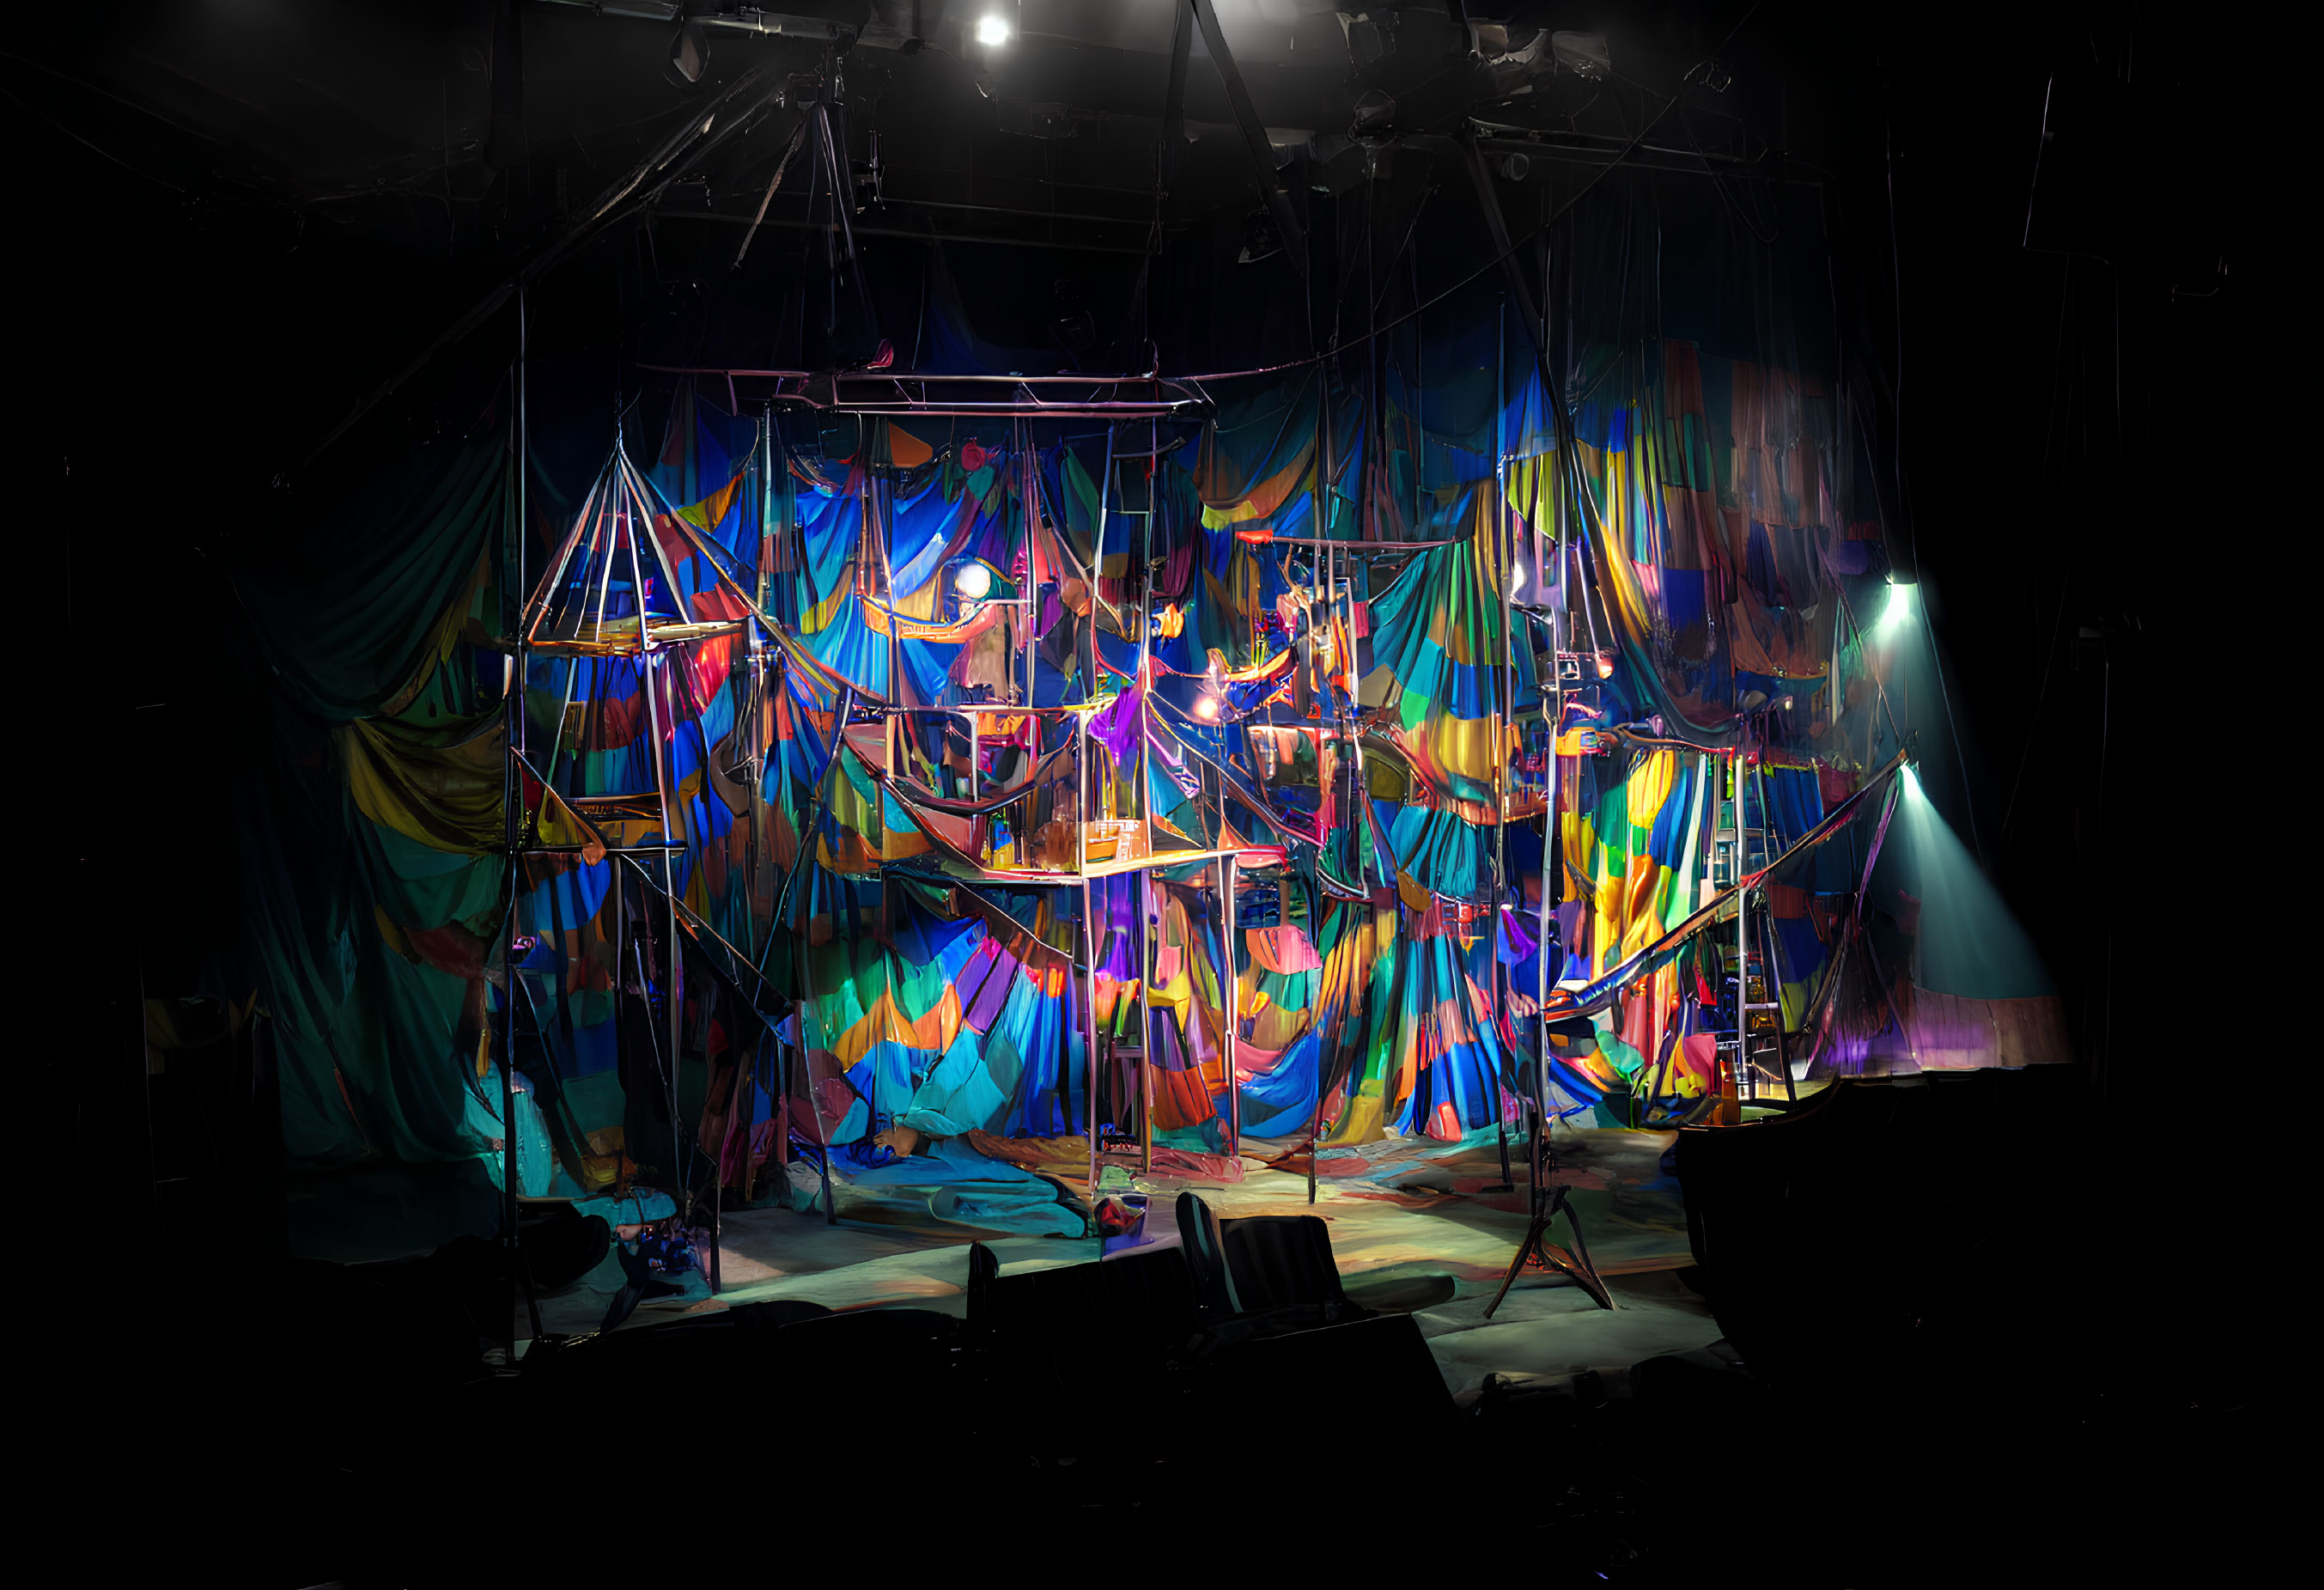 Colorful abstract backdrop designs on theatrical stage set with scaffolding and dynamic lighting